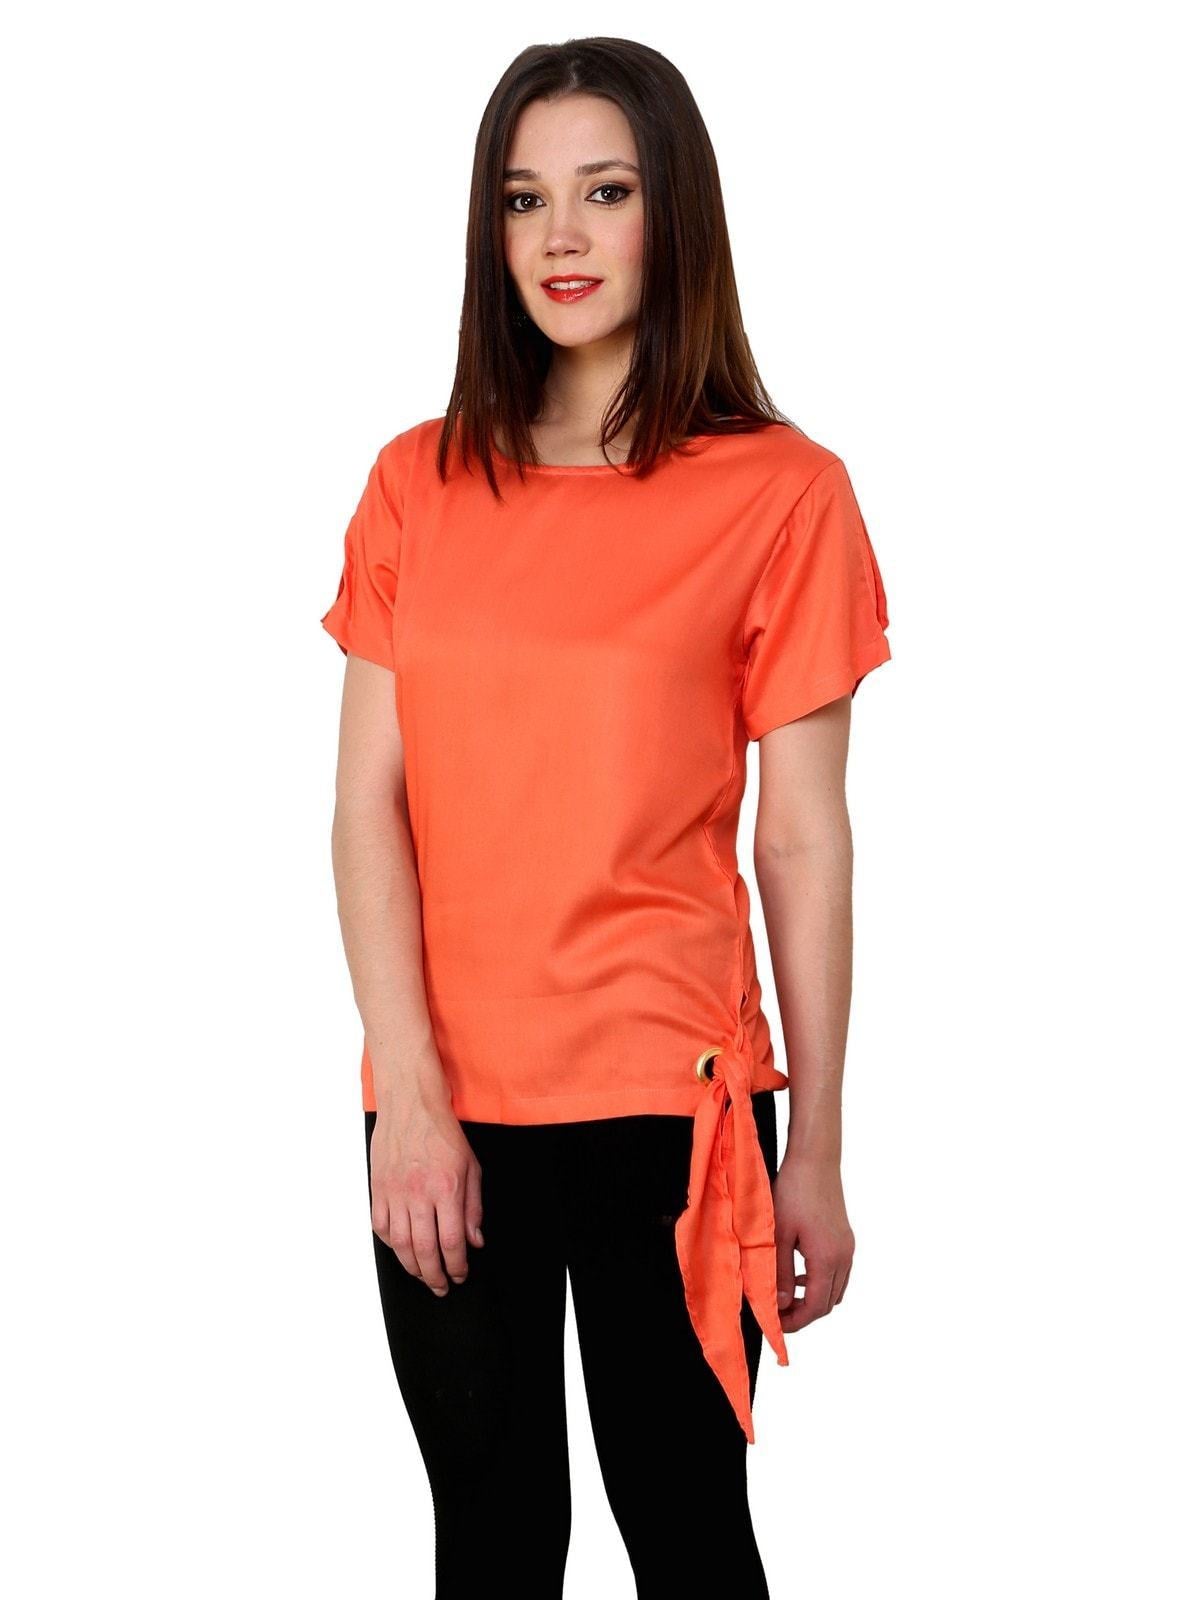 Women's Knotted Top - Pannkh